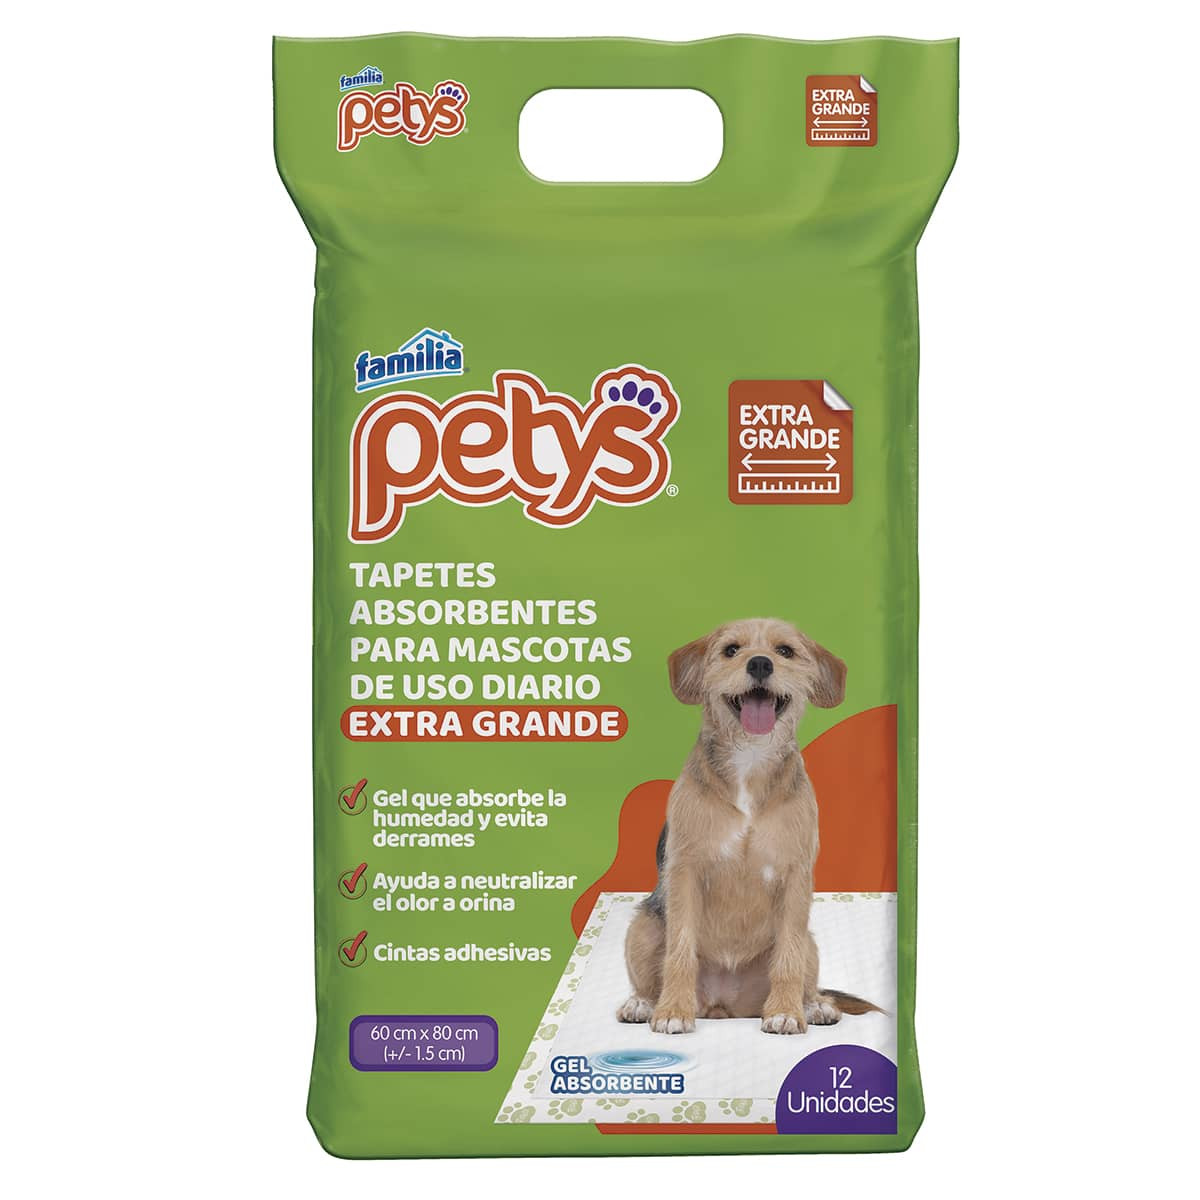 Imagen Tapetes Absorbentes Petys Extra-Grandes x 12 und 1